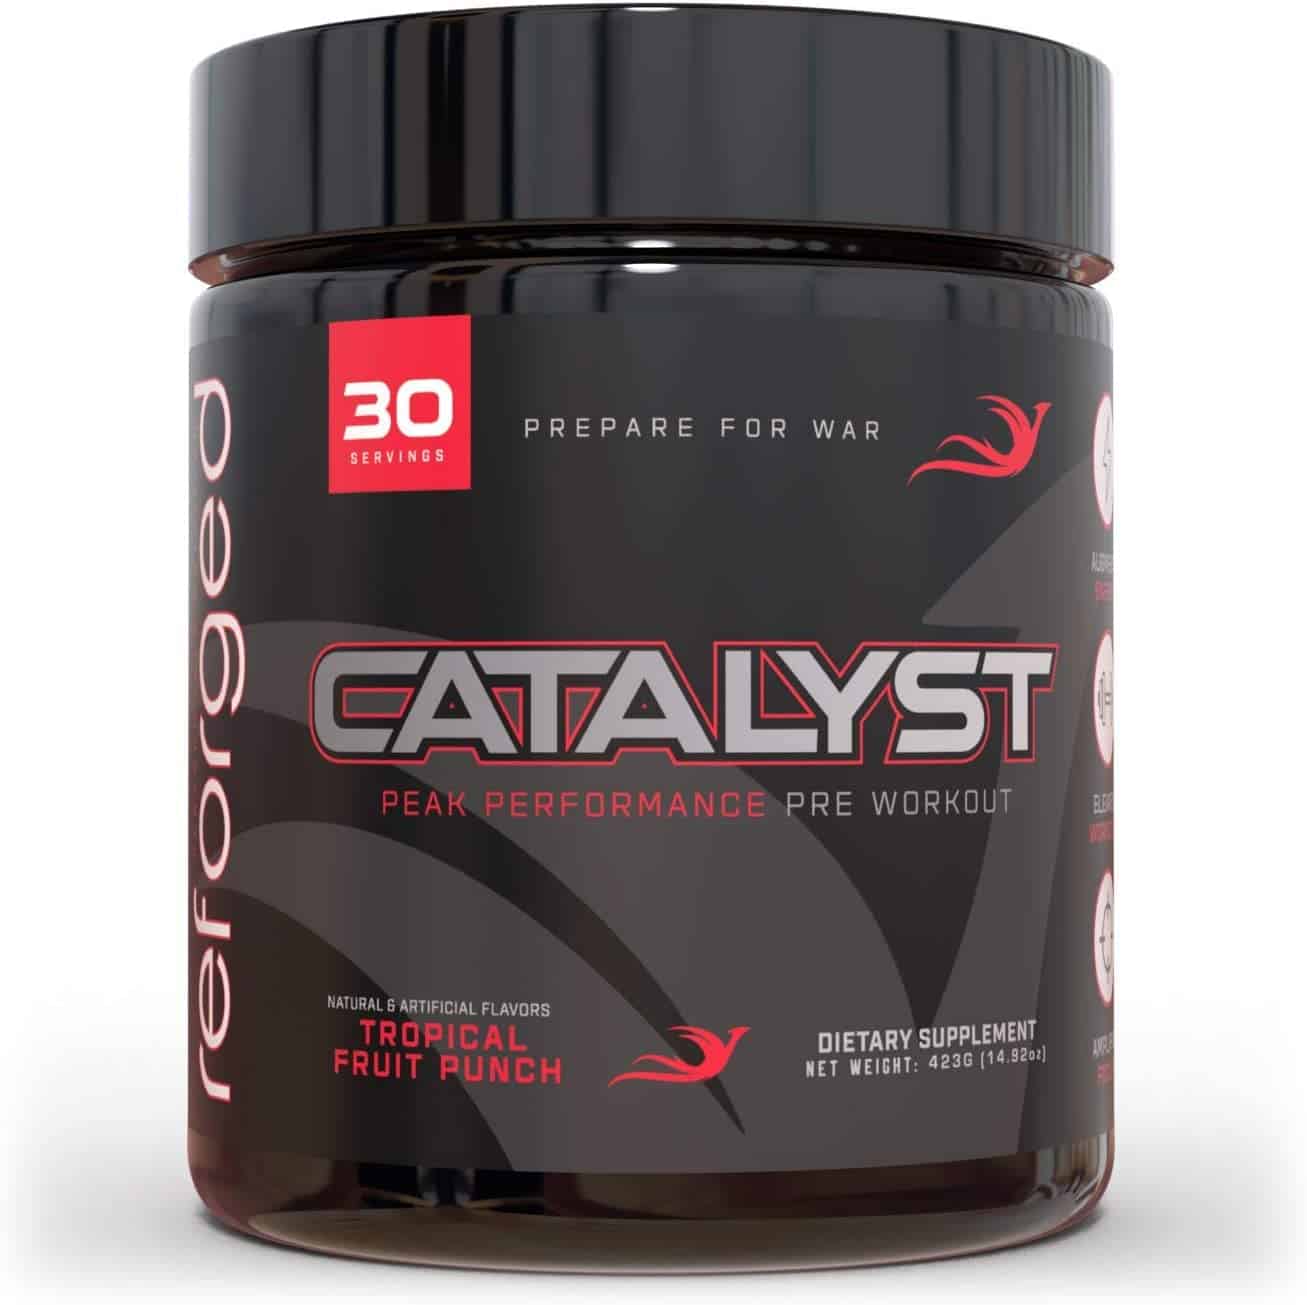 reforged catalyst pre workout